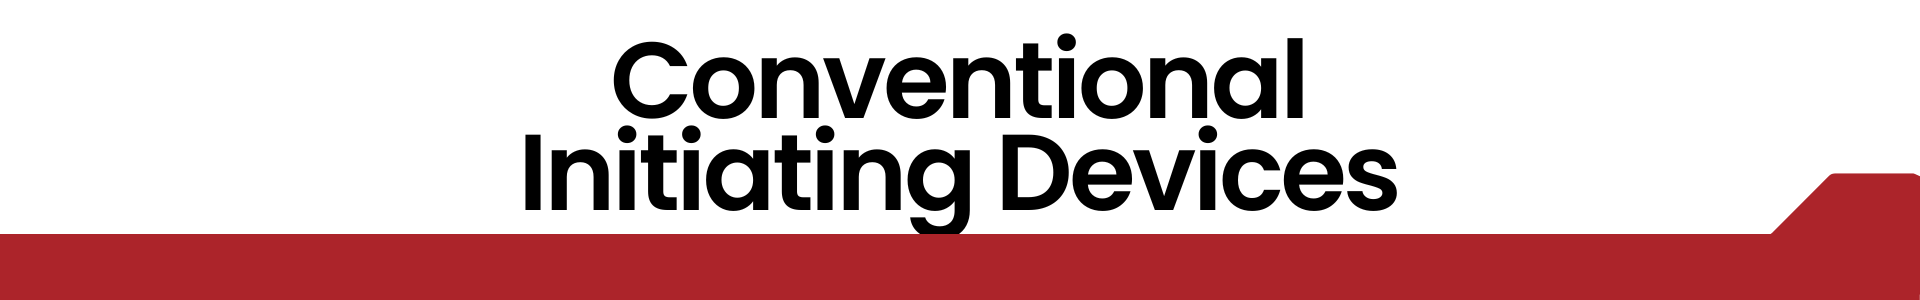 Conventional Initiating Devices